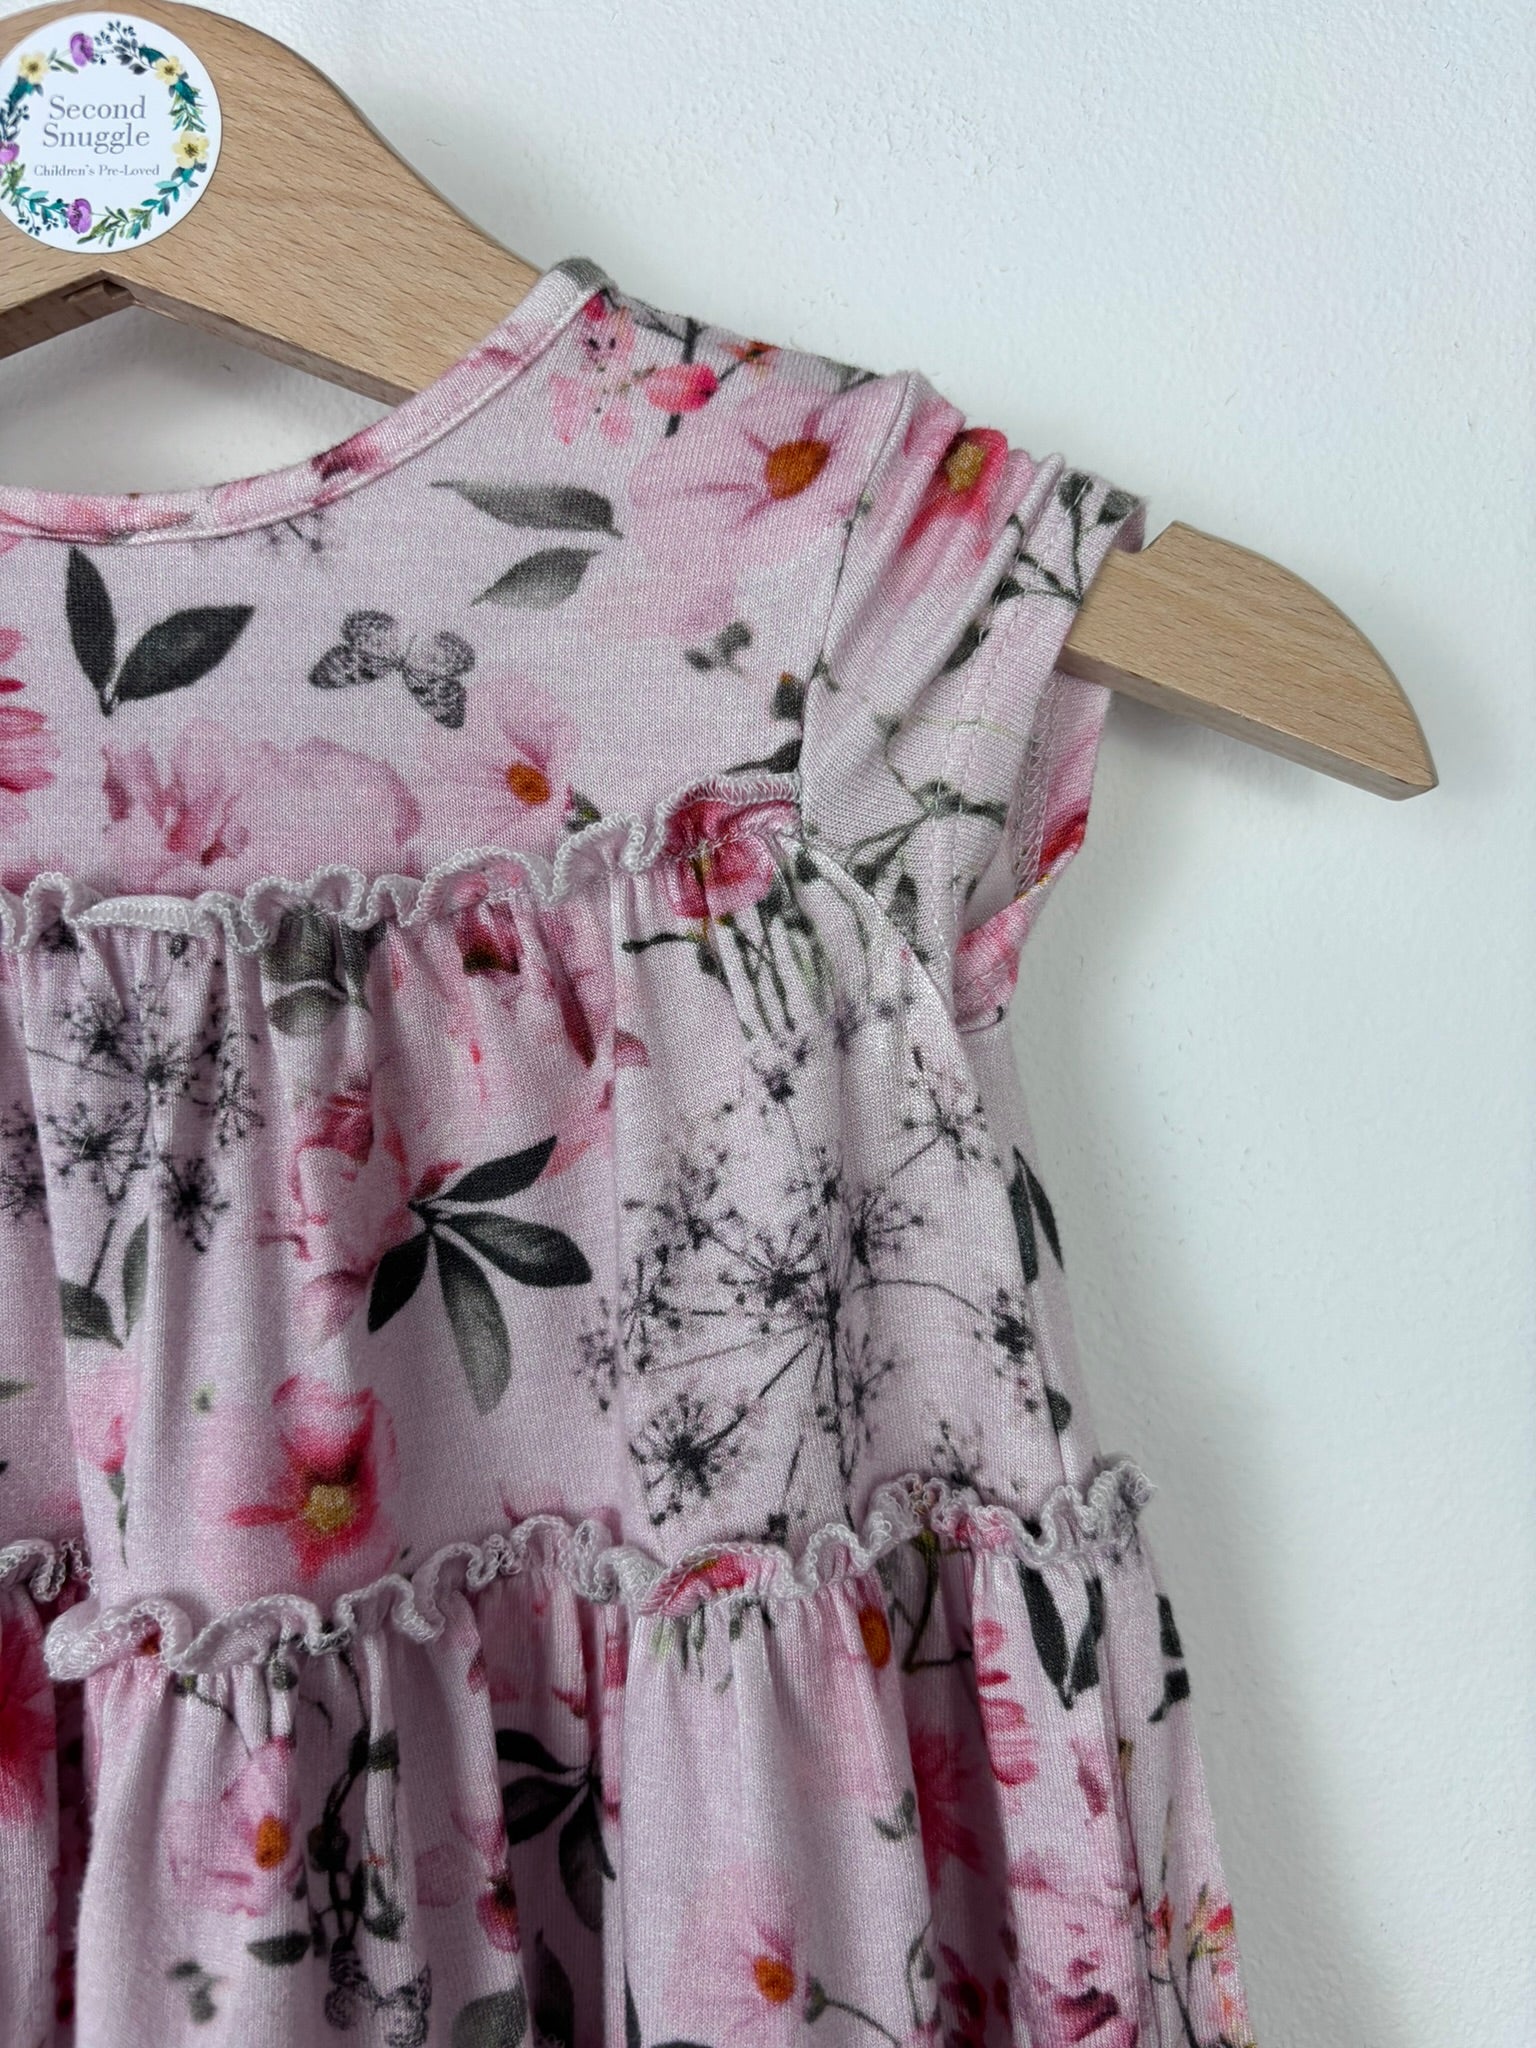 Next Up To 1 Month-Dresses-Second Snuggle Preloved